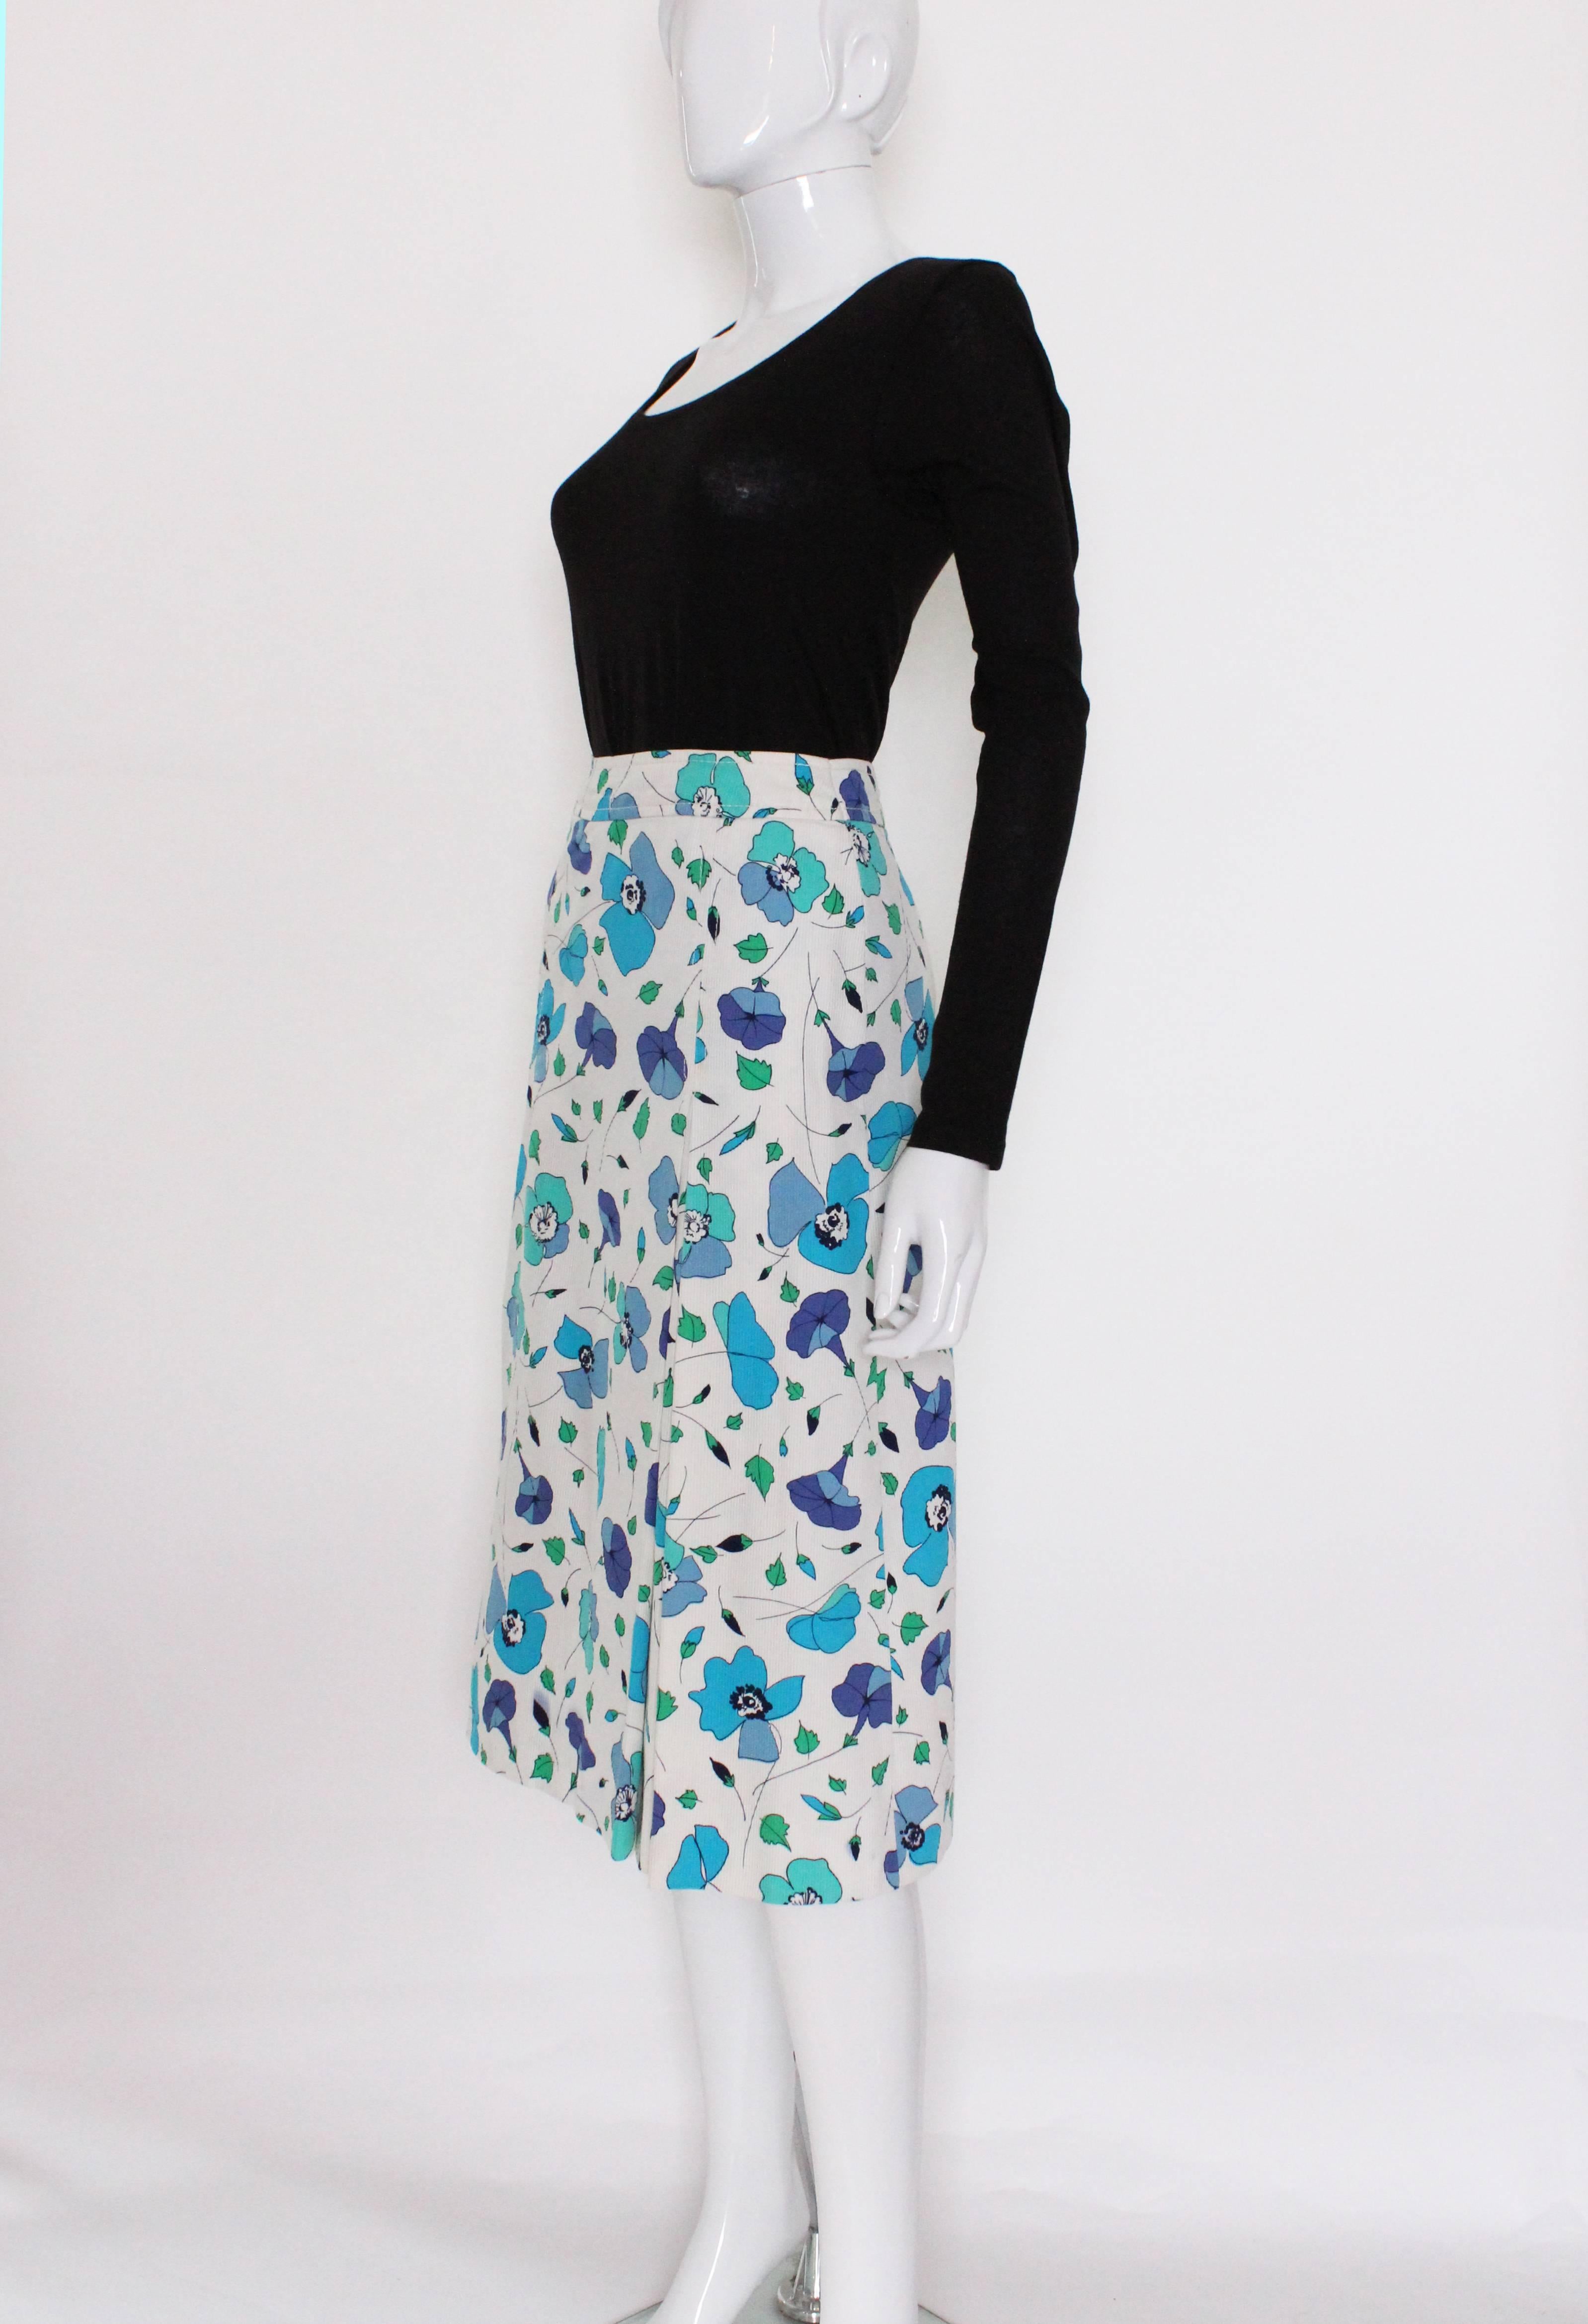 A great skirt for Spring/Summer by French fashion house Celine.
This is a fun , floral printed vintage skirt by Celine.. It has a wonderful floral print on a white ribbed cotton background.The skirt has some unusual pleat detail, with one pleat on